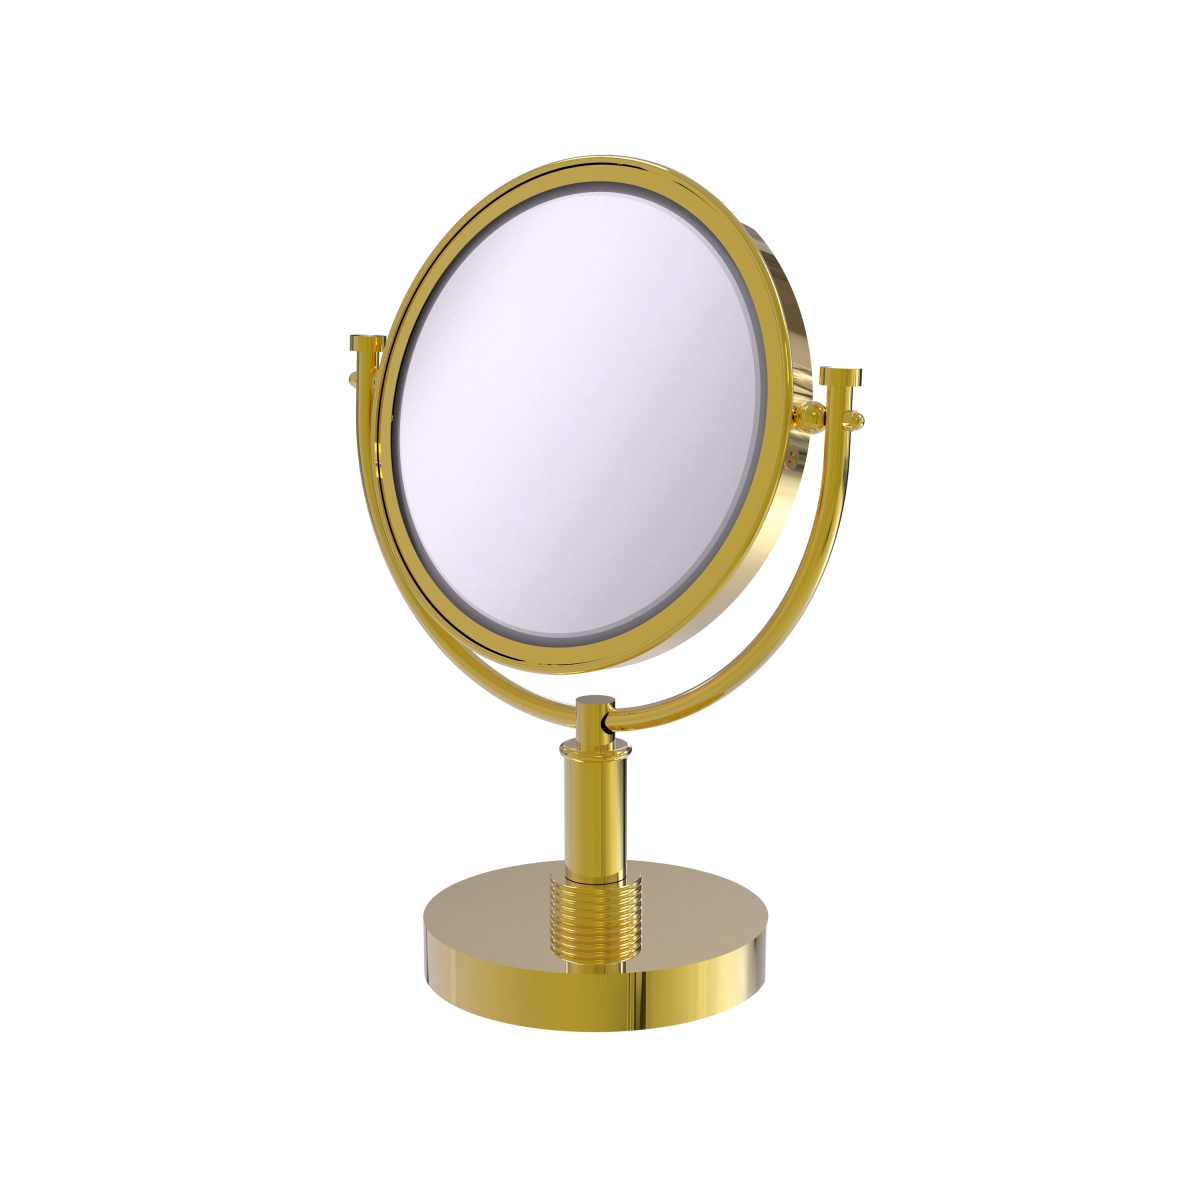 Dm-4g-3x-unl Grooved Ring Style 8 In. Vanity Top Make-up Mirror 3x Magnification, Unlacquered Brass